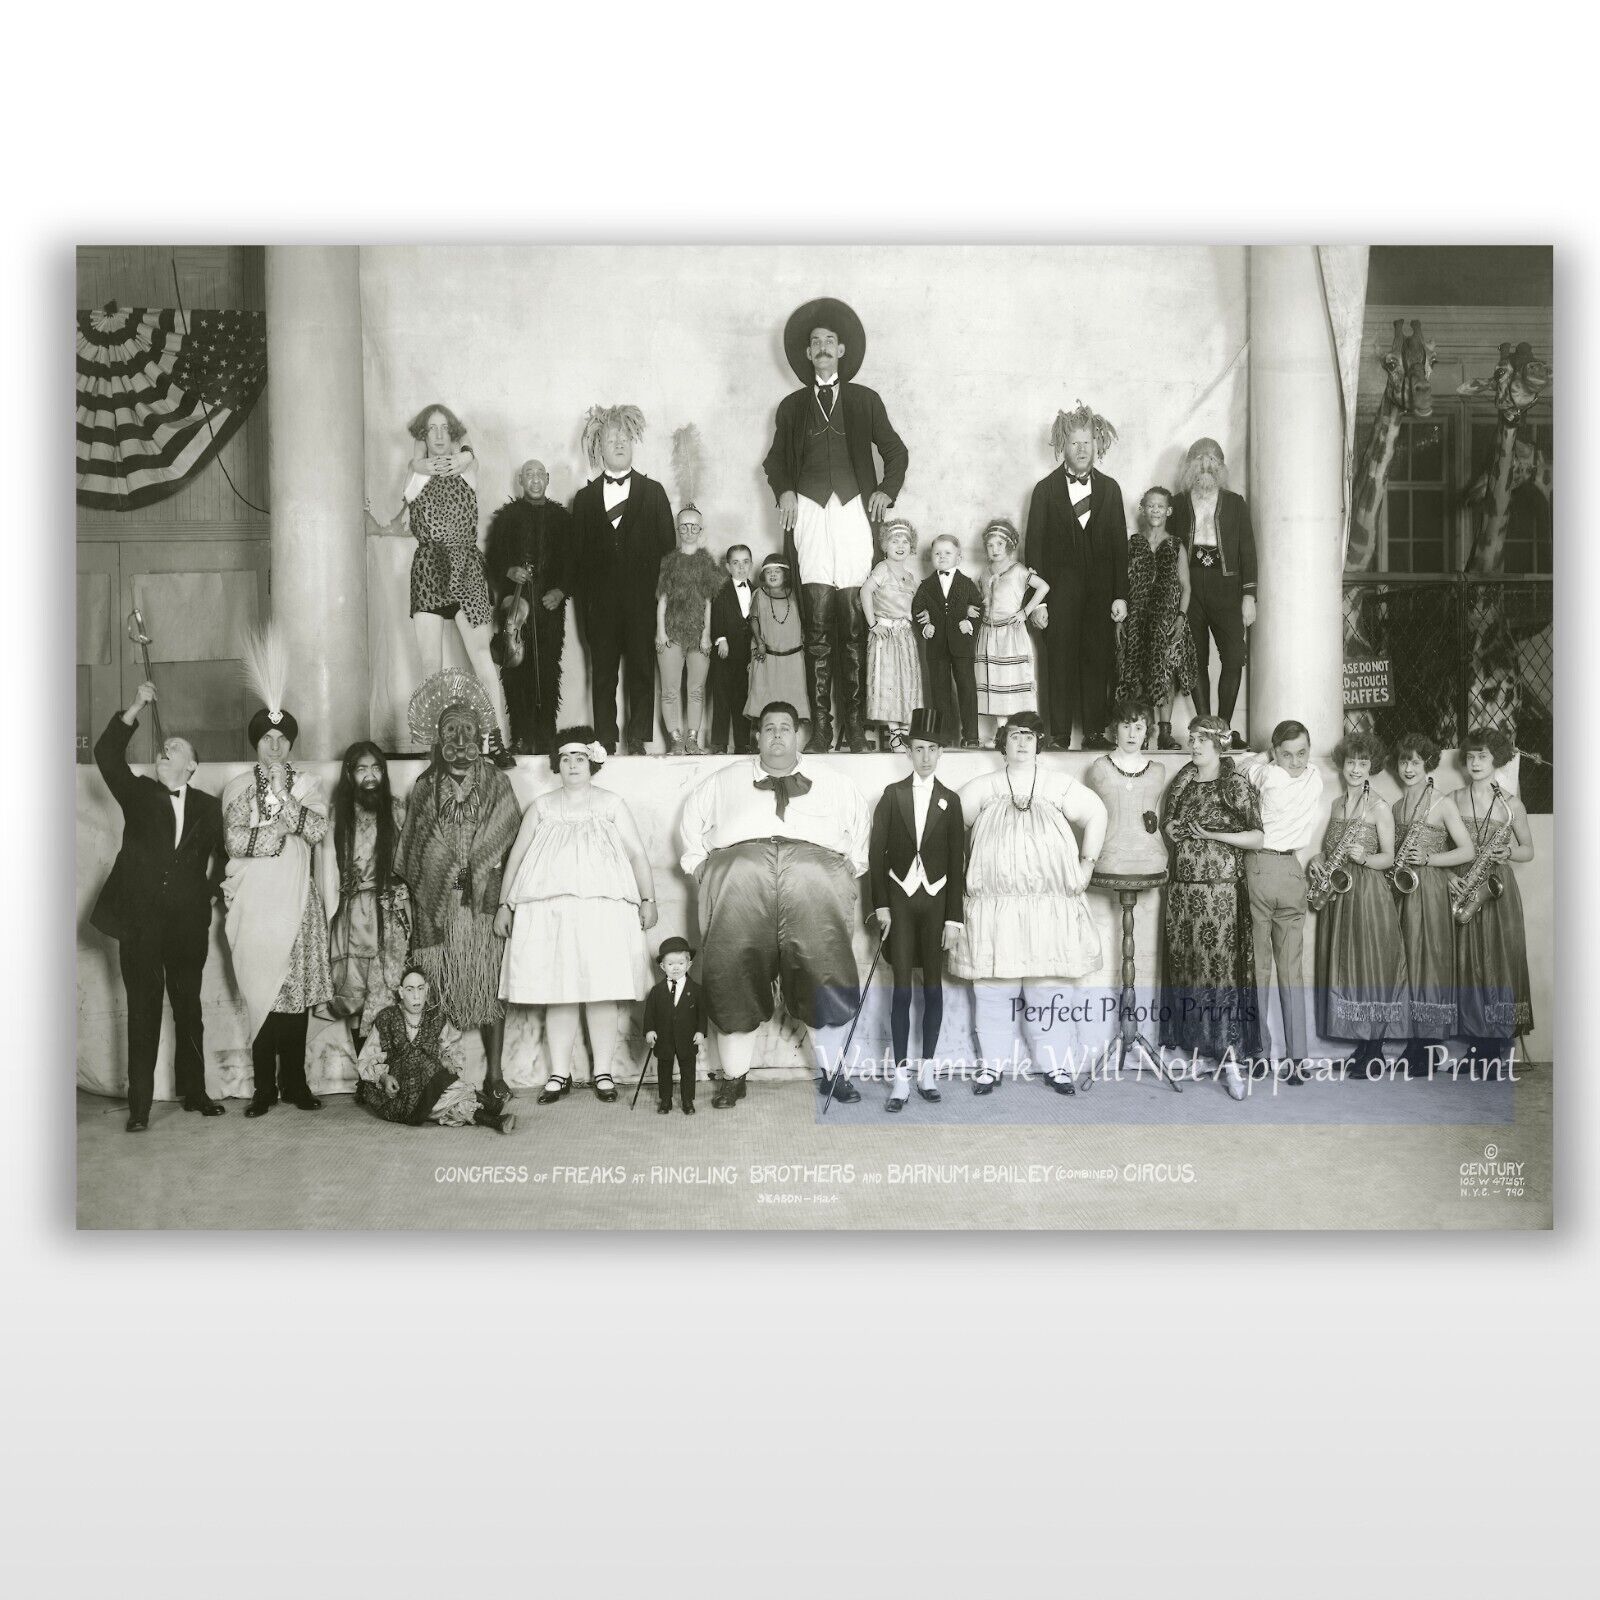 Congress of Freaks Circus Sideshow Ringling Brothers Odd Vintage Photo Print